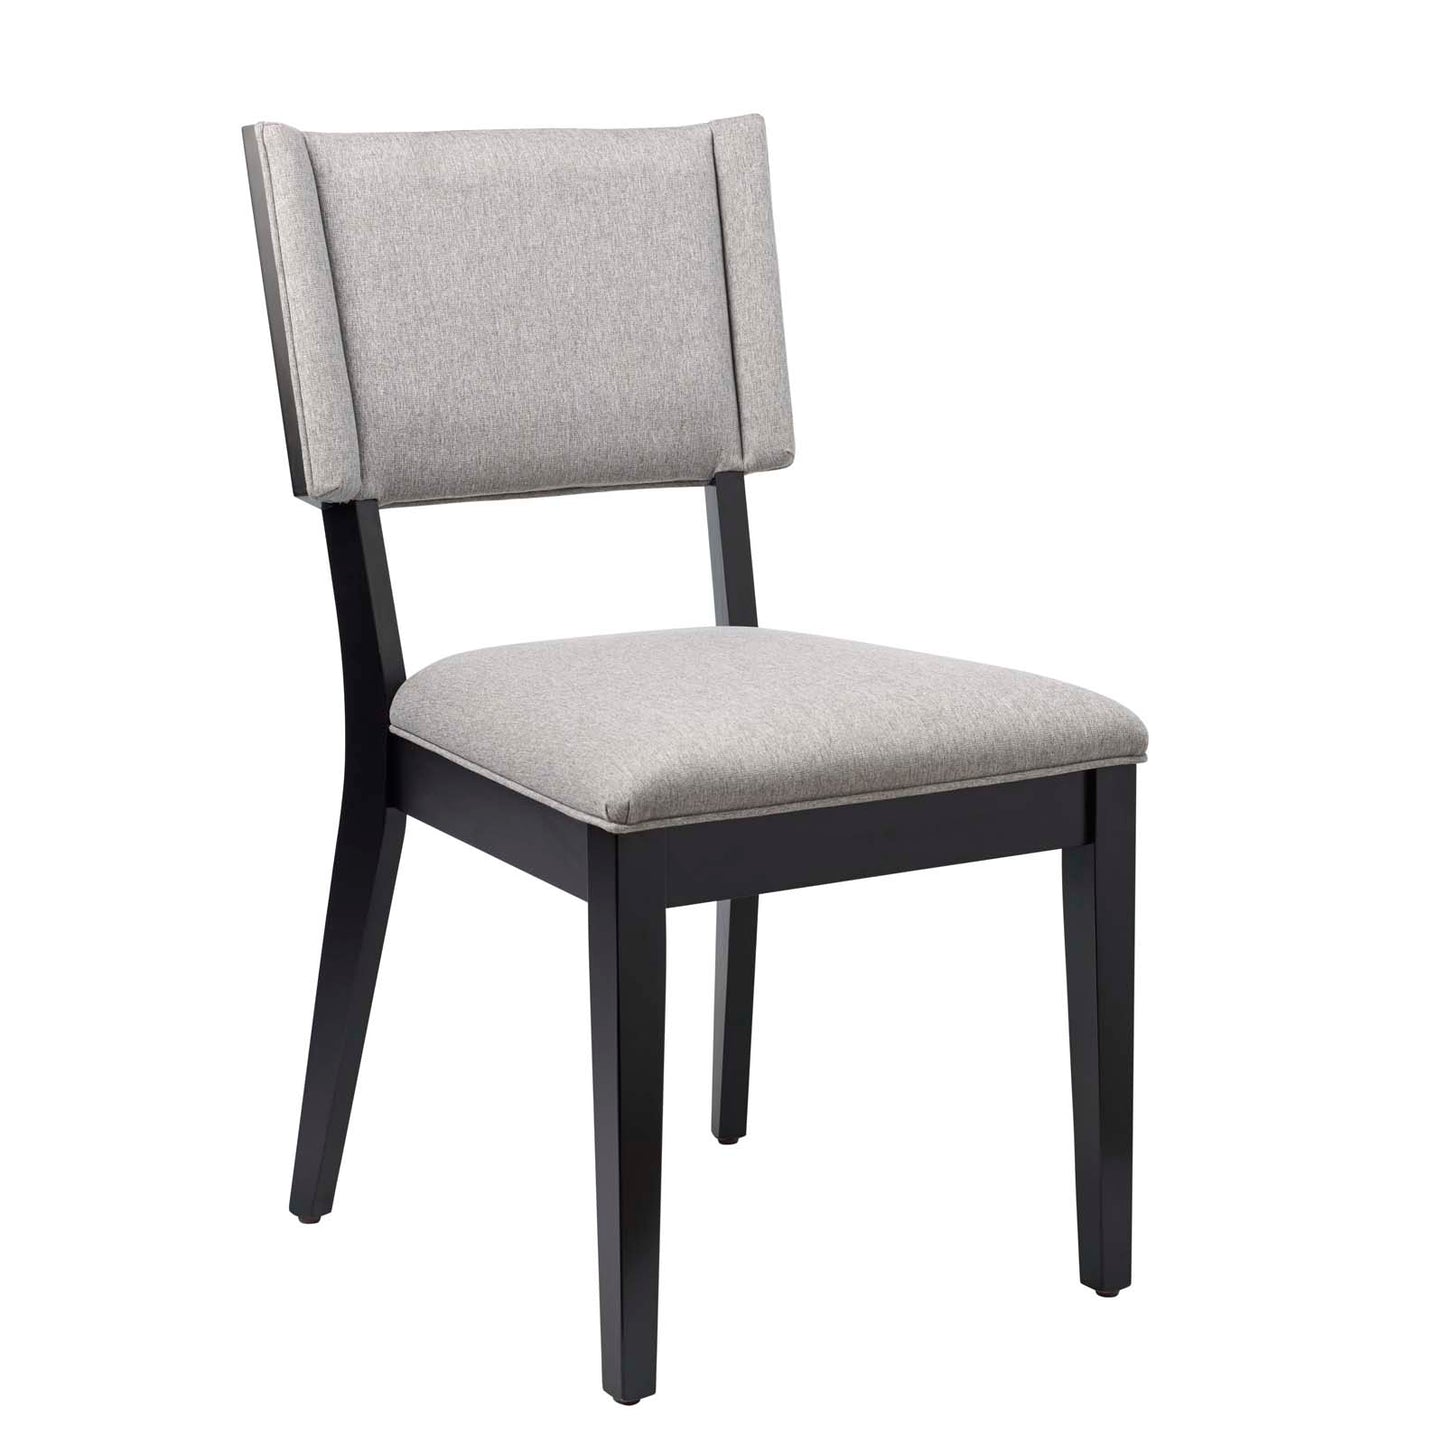 Esquire Dining Chairs - Set of 2 Light Gray EEI-4559-LGR